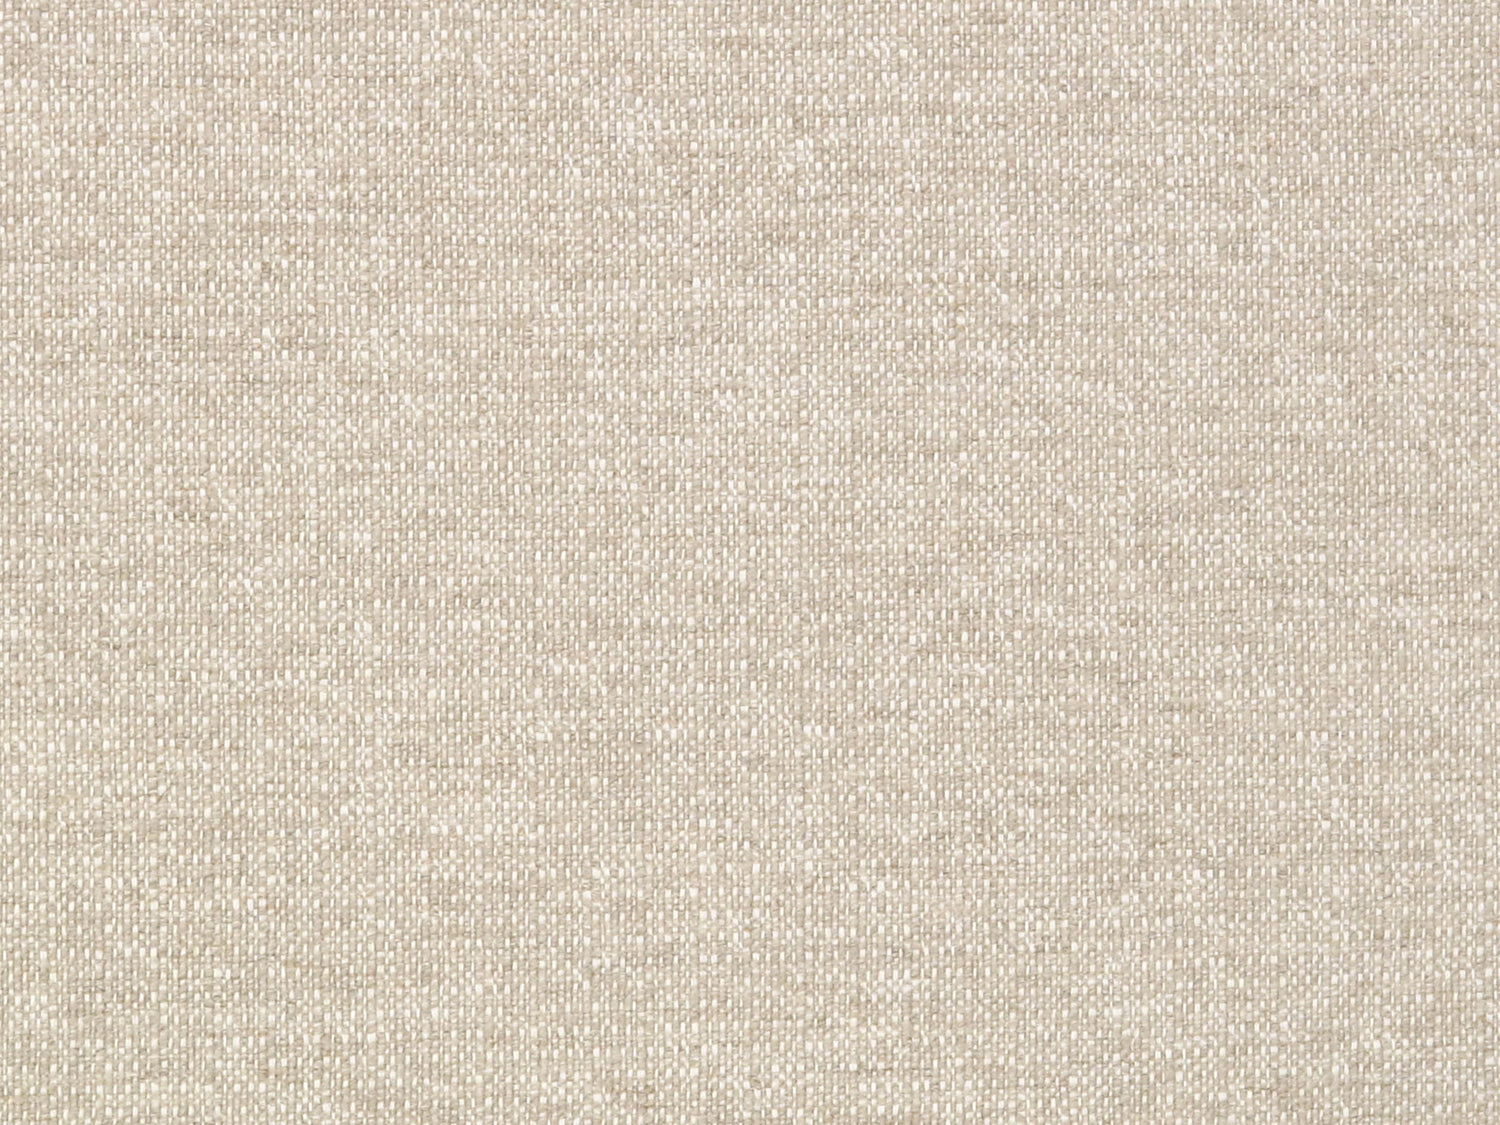 Sugarloaf fabric in natural color - pattern number BZ 00030508 - by Scalamandre in the Old World Weavers collection